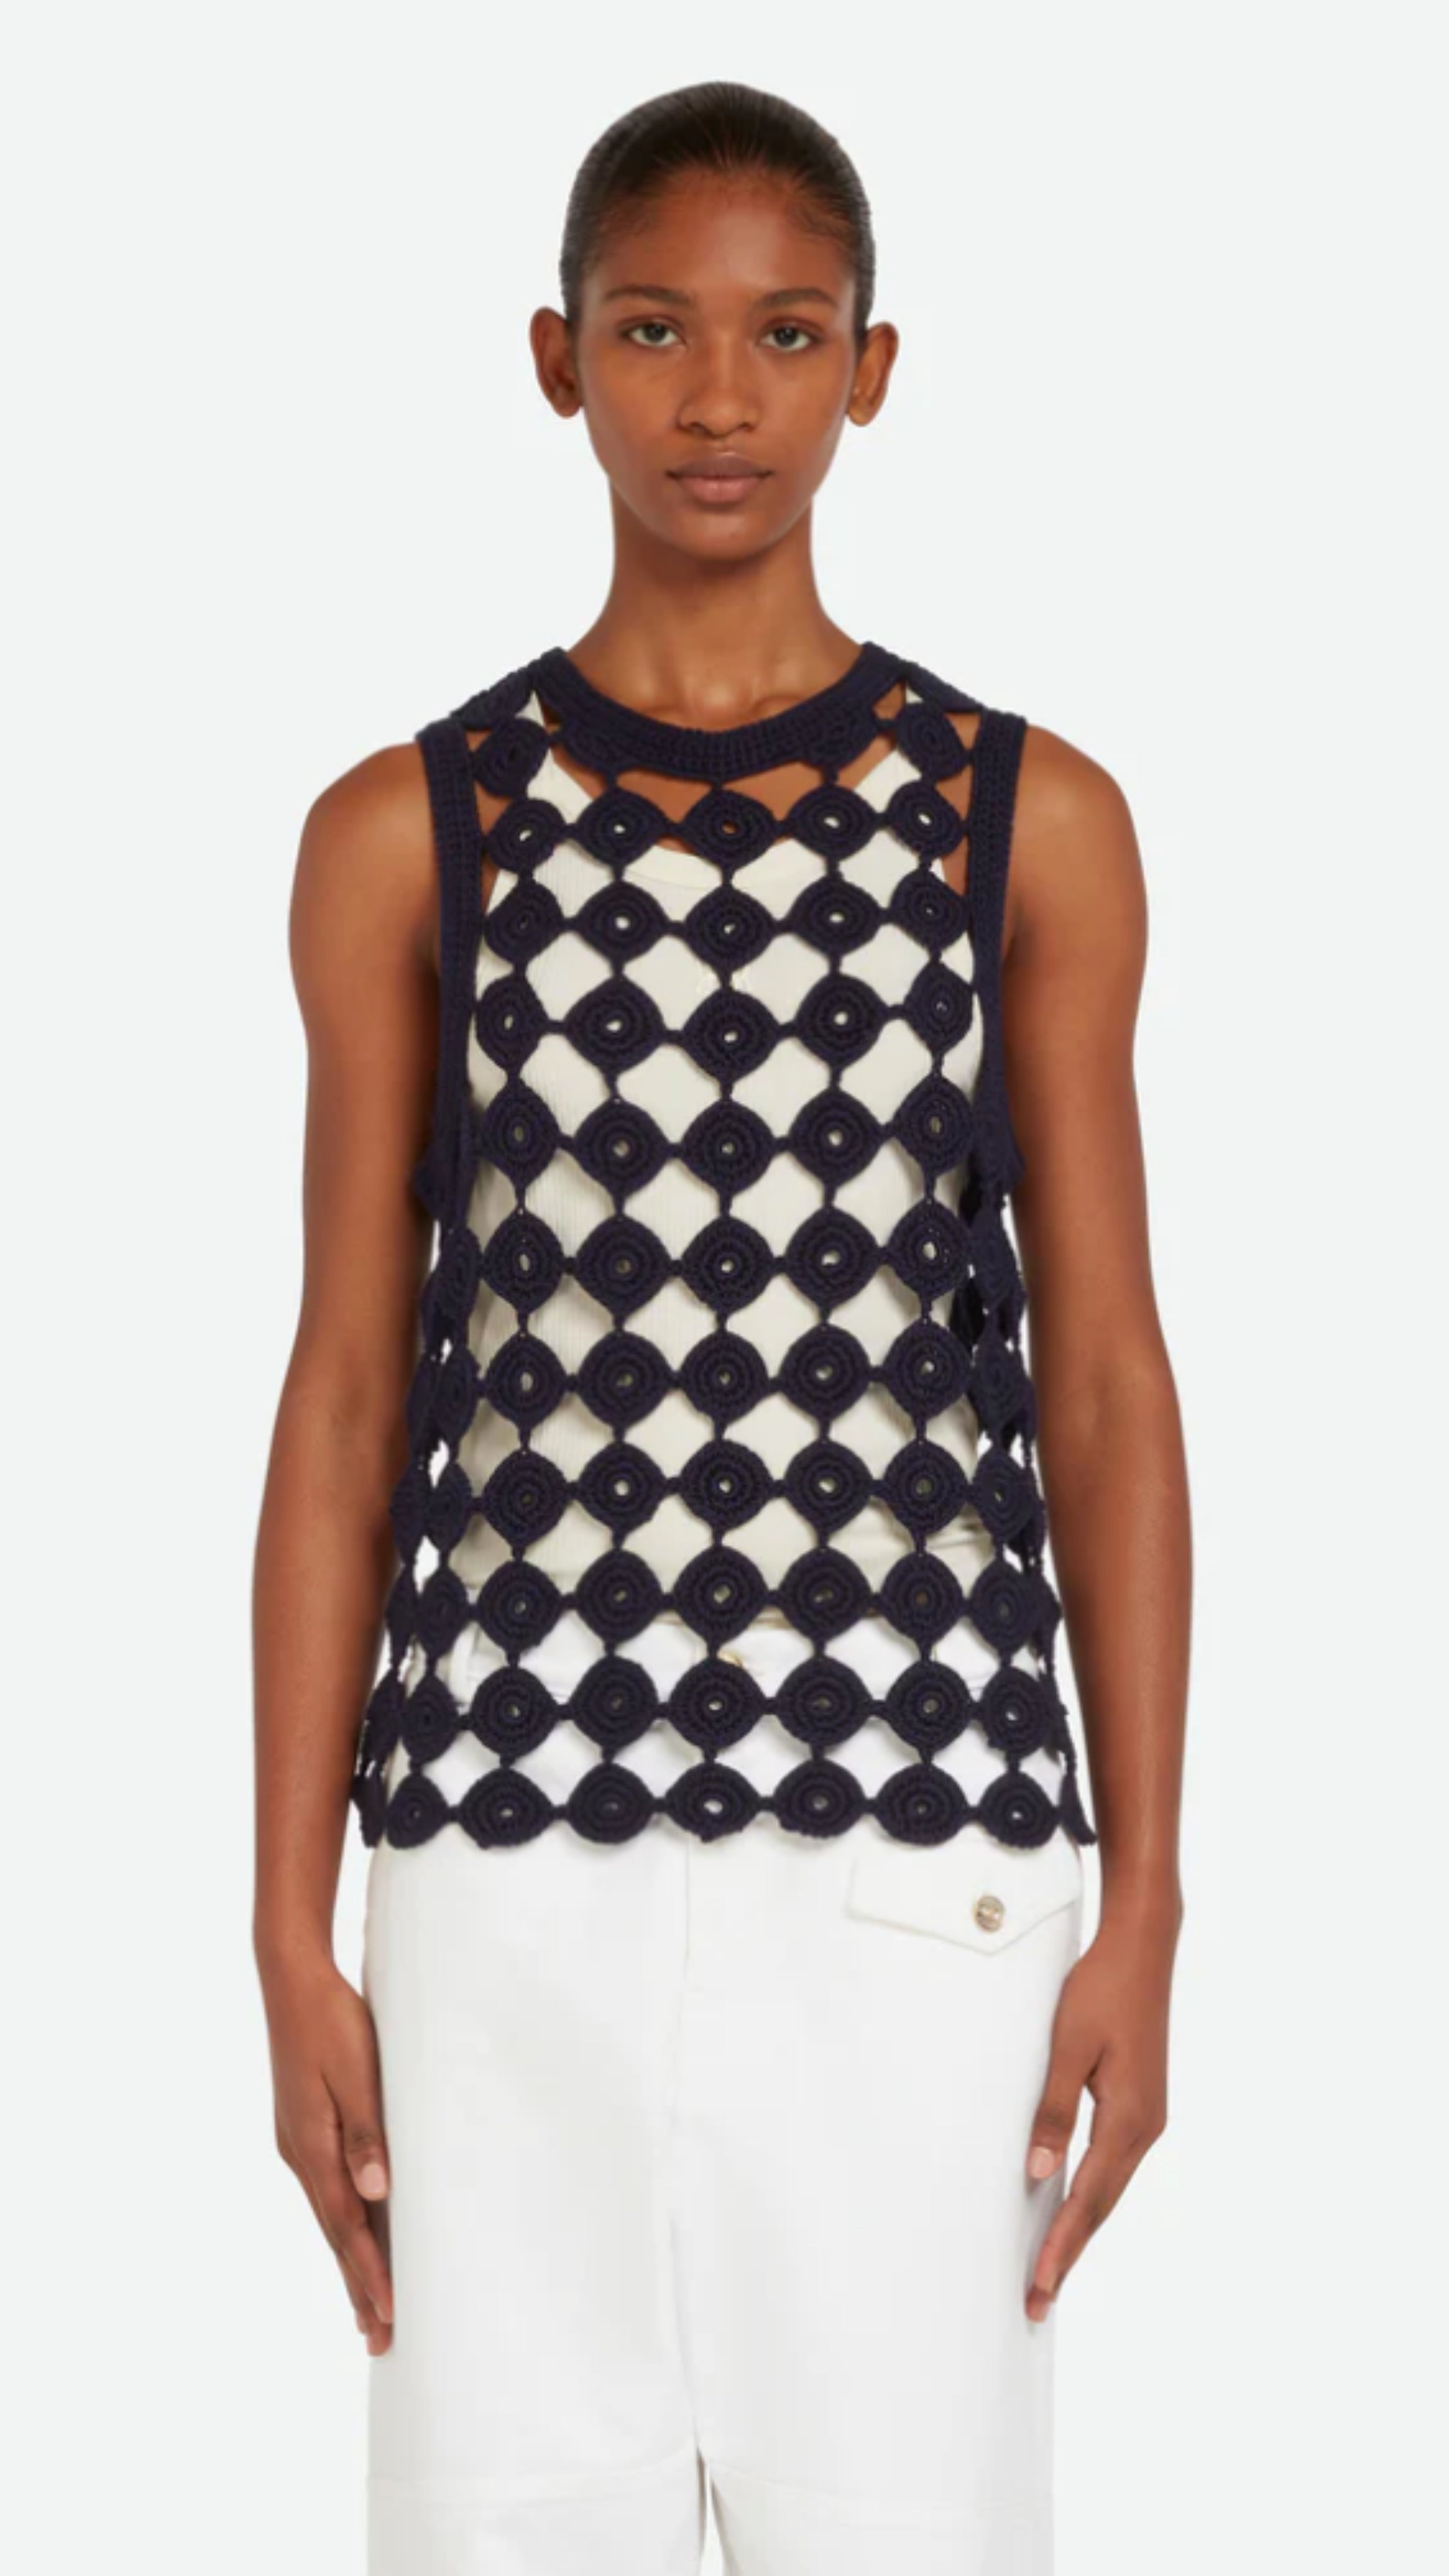 Wales Bonner Stanza Knit Vest Crafted from an open knit cotton and lycra blend in navy blue. A sleeveless style vest top with a rounded neckline. Shown on a model facing front.